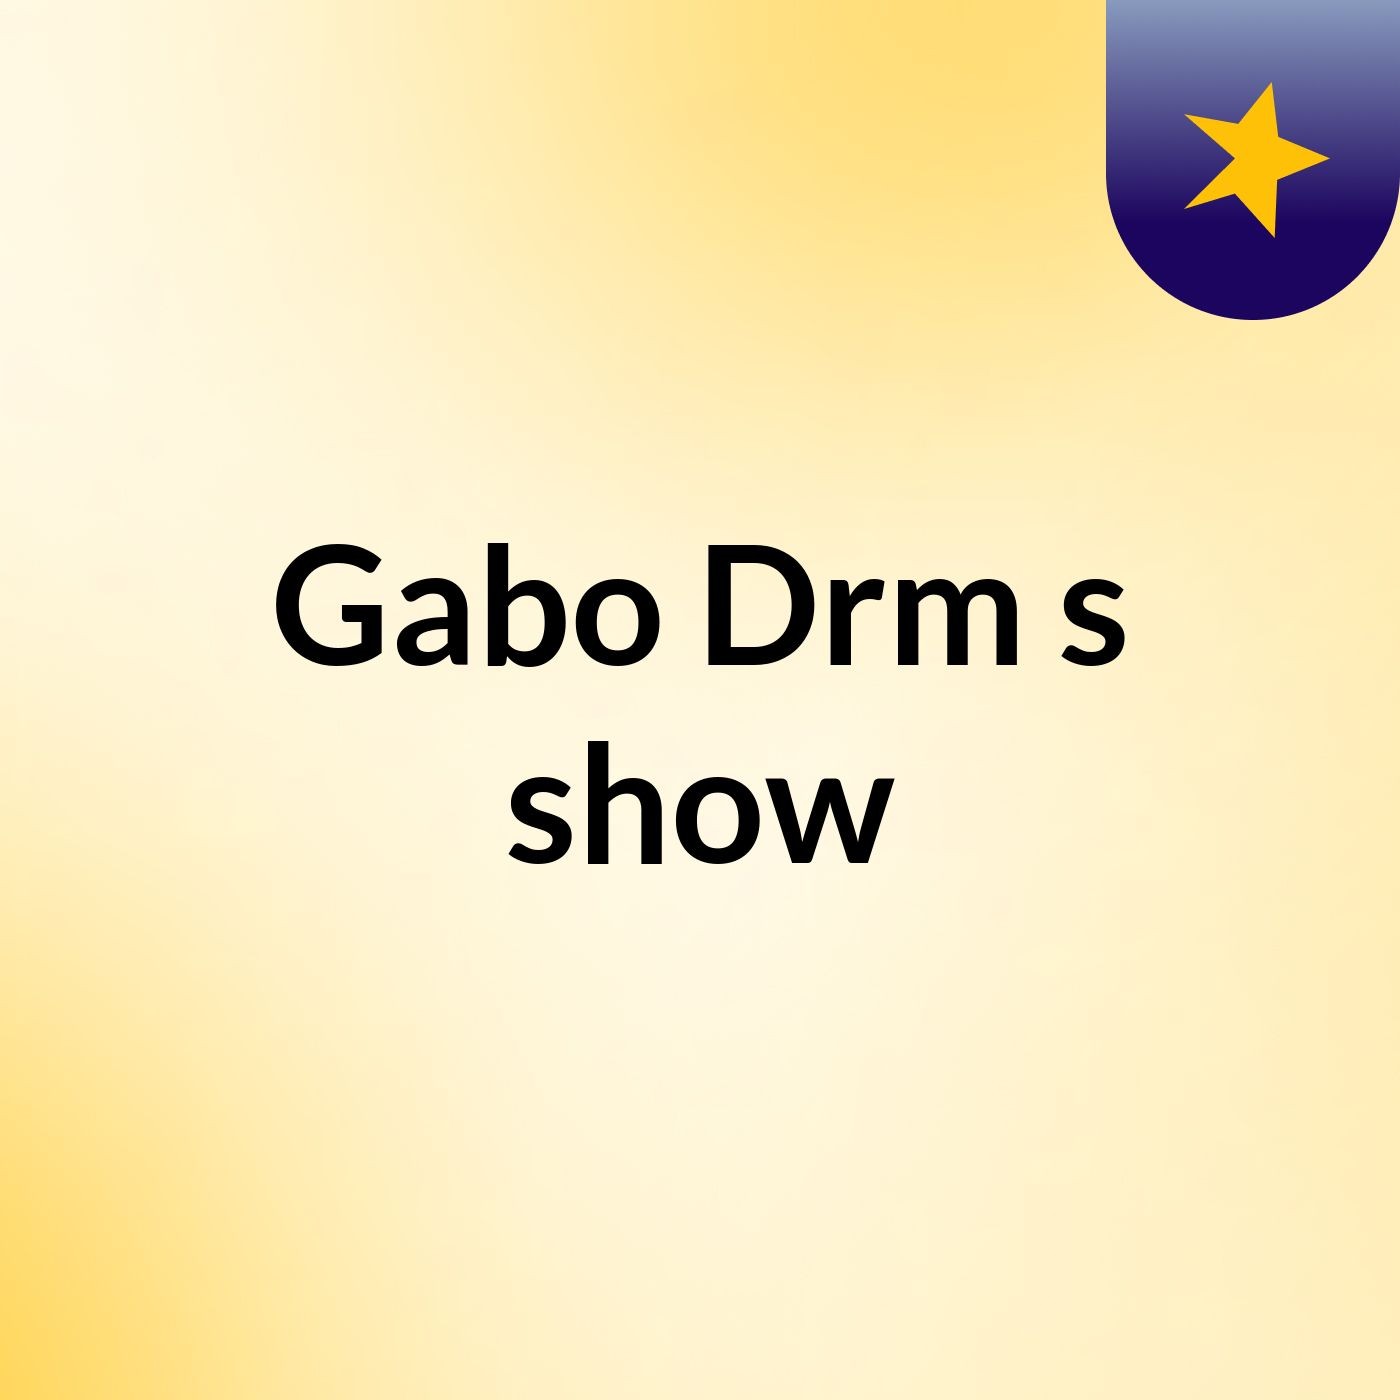 Gabo Drm's show